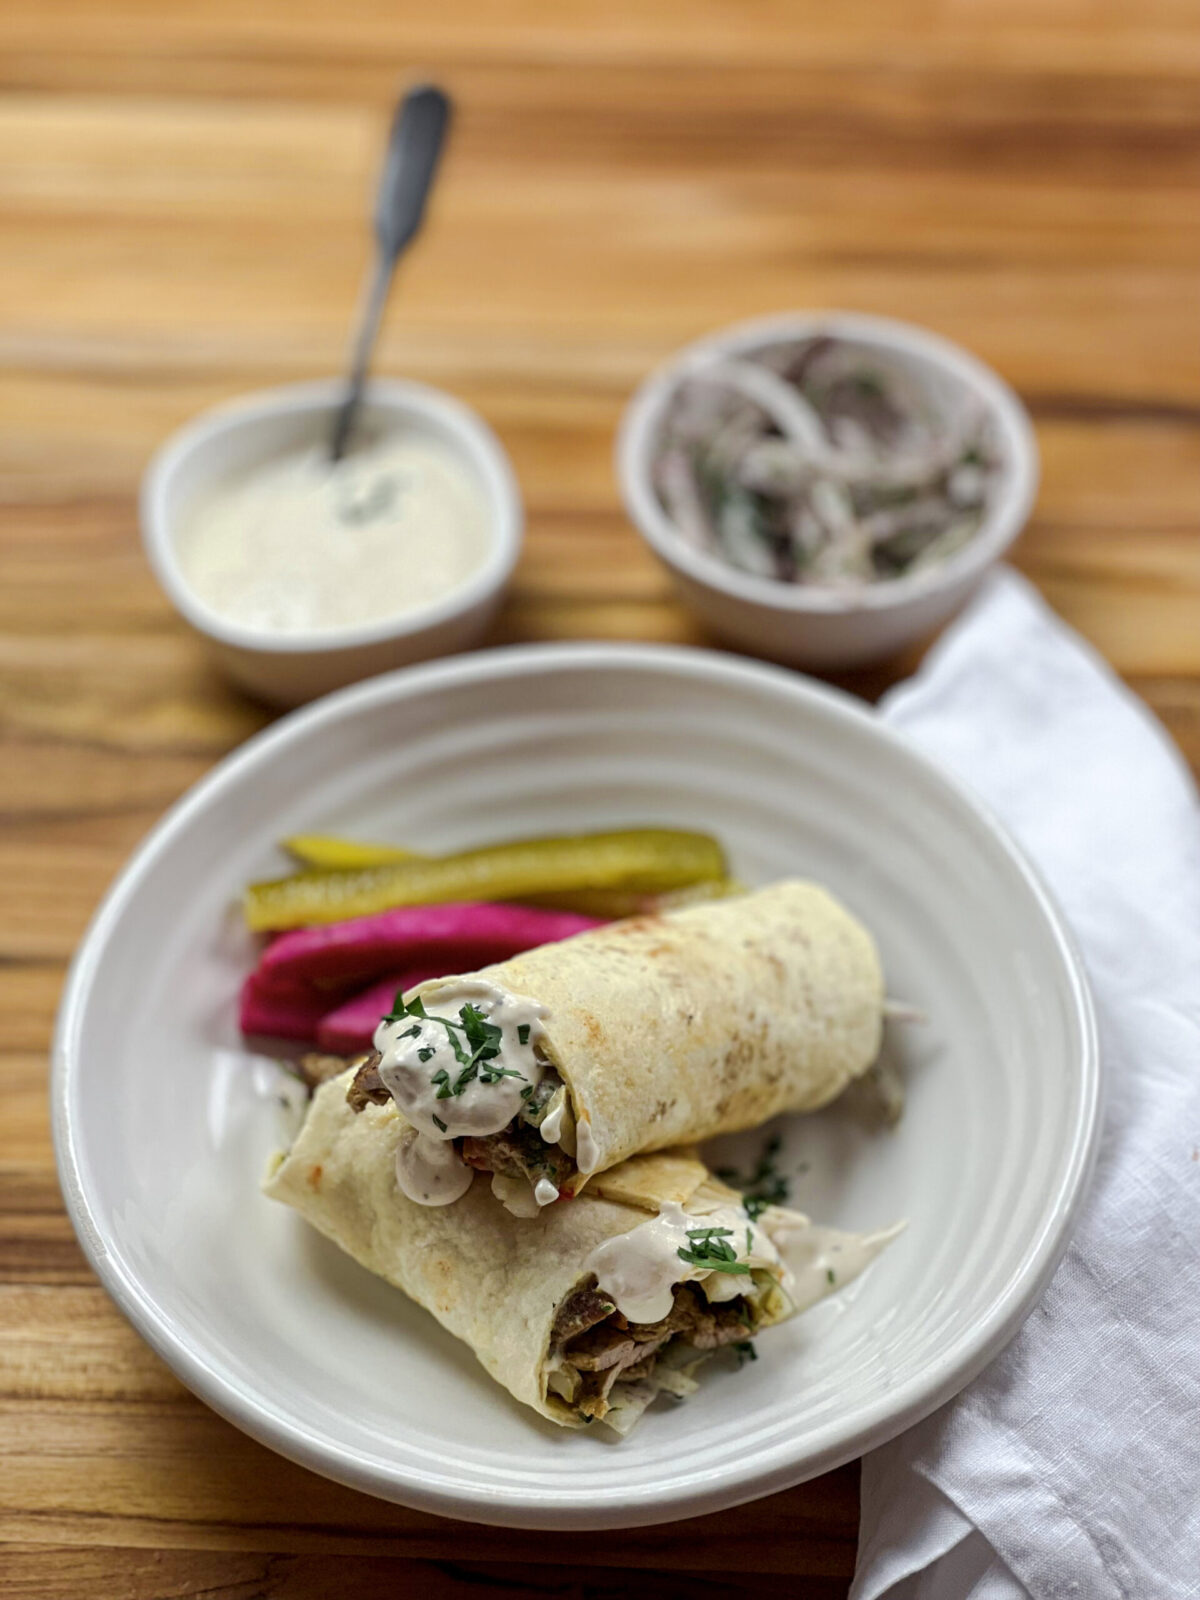 A delicious homemade shawarma wrap with sliced chicken, vegetables, and tzatziki sauce wrapped in a warm pita bread